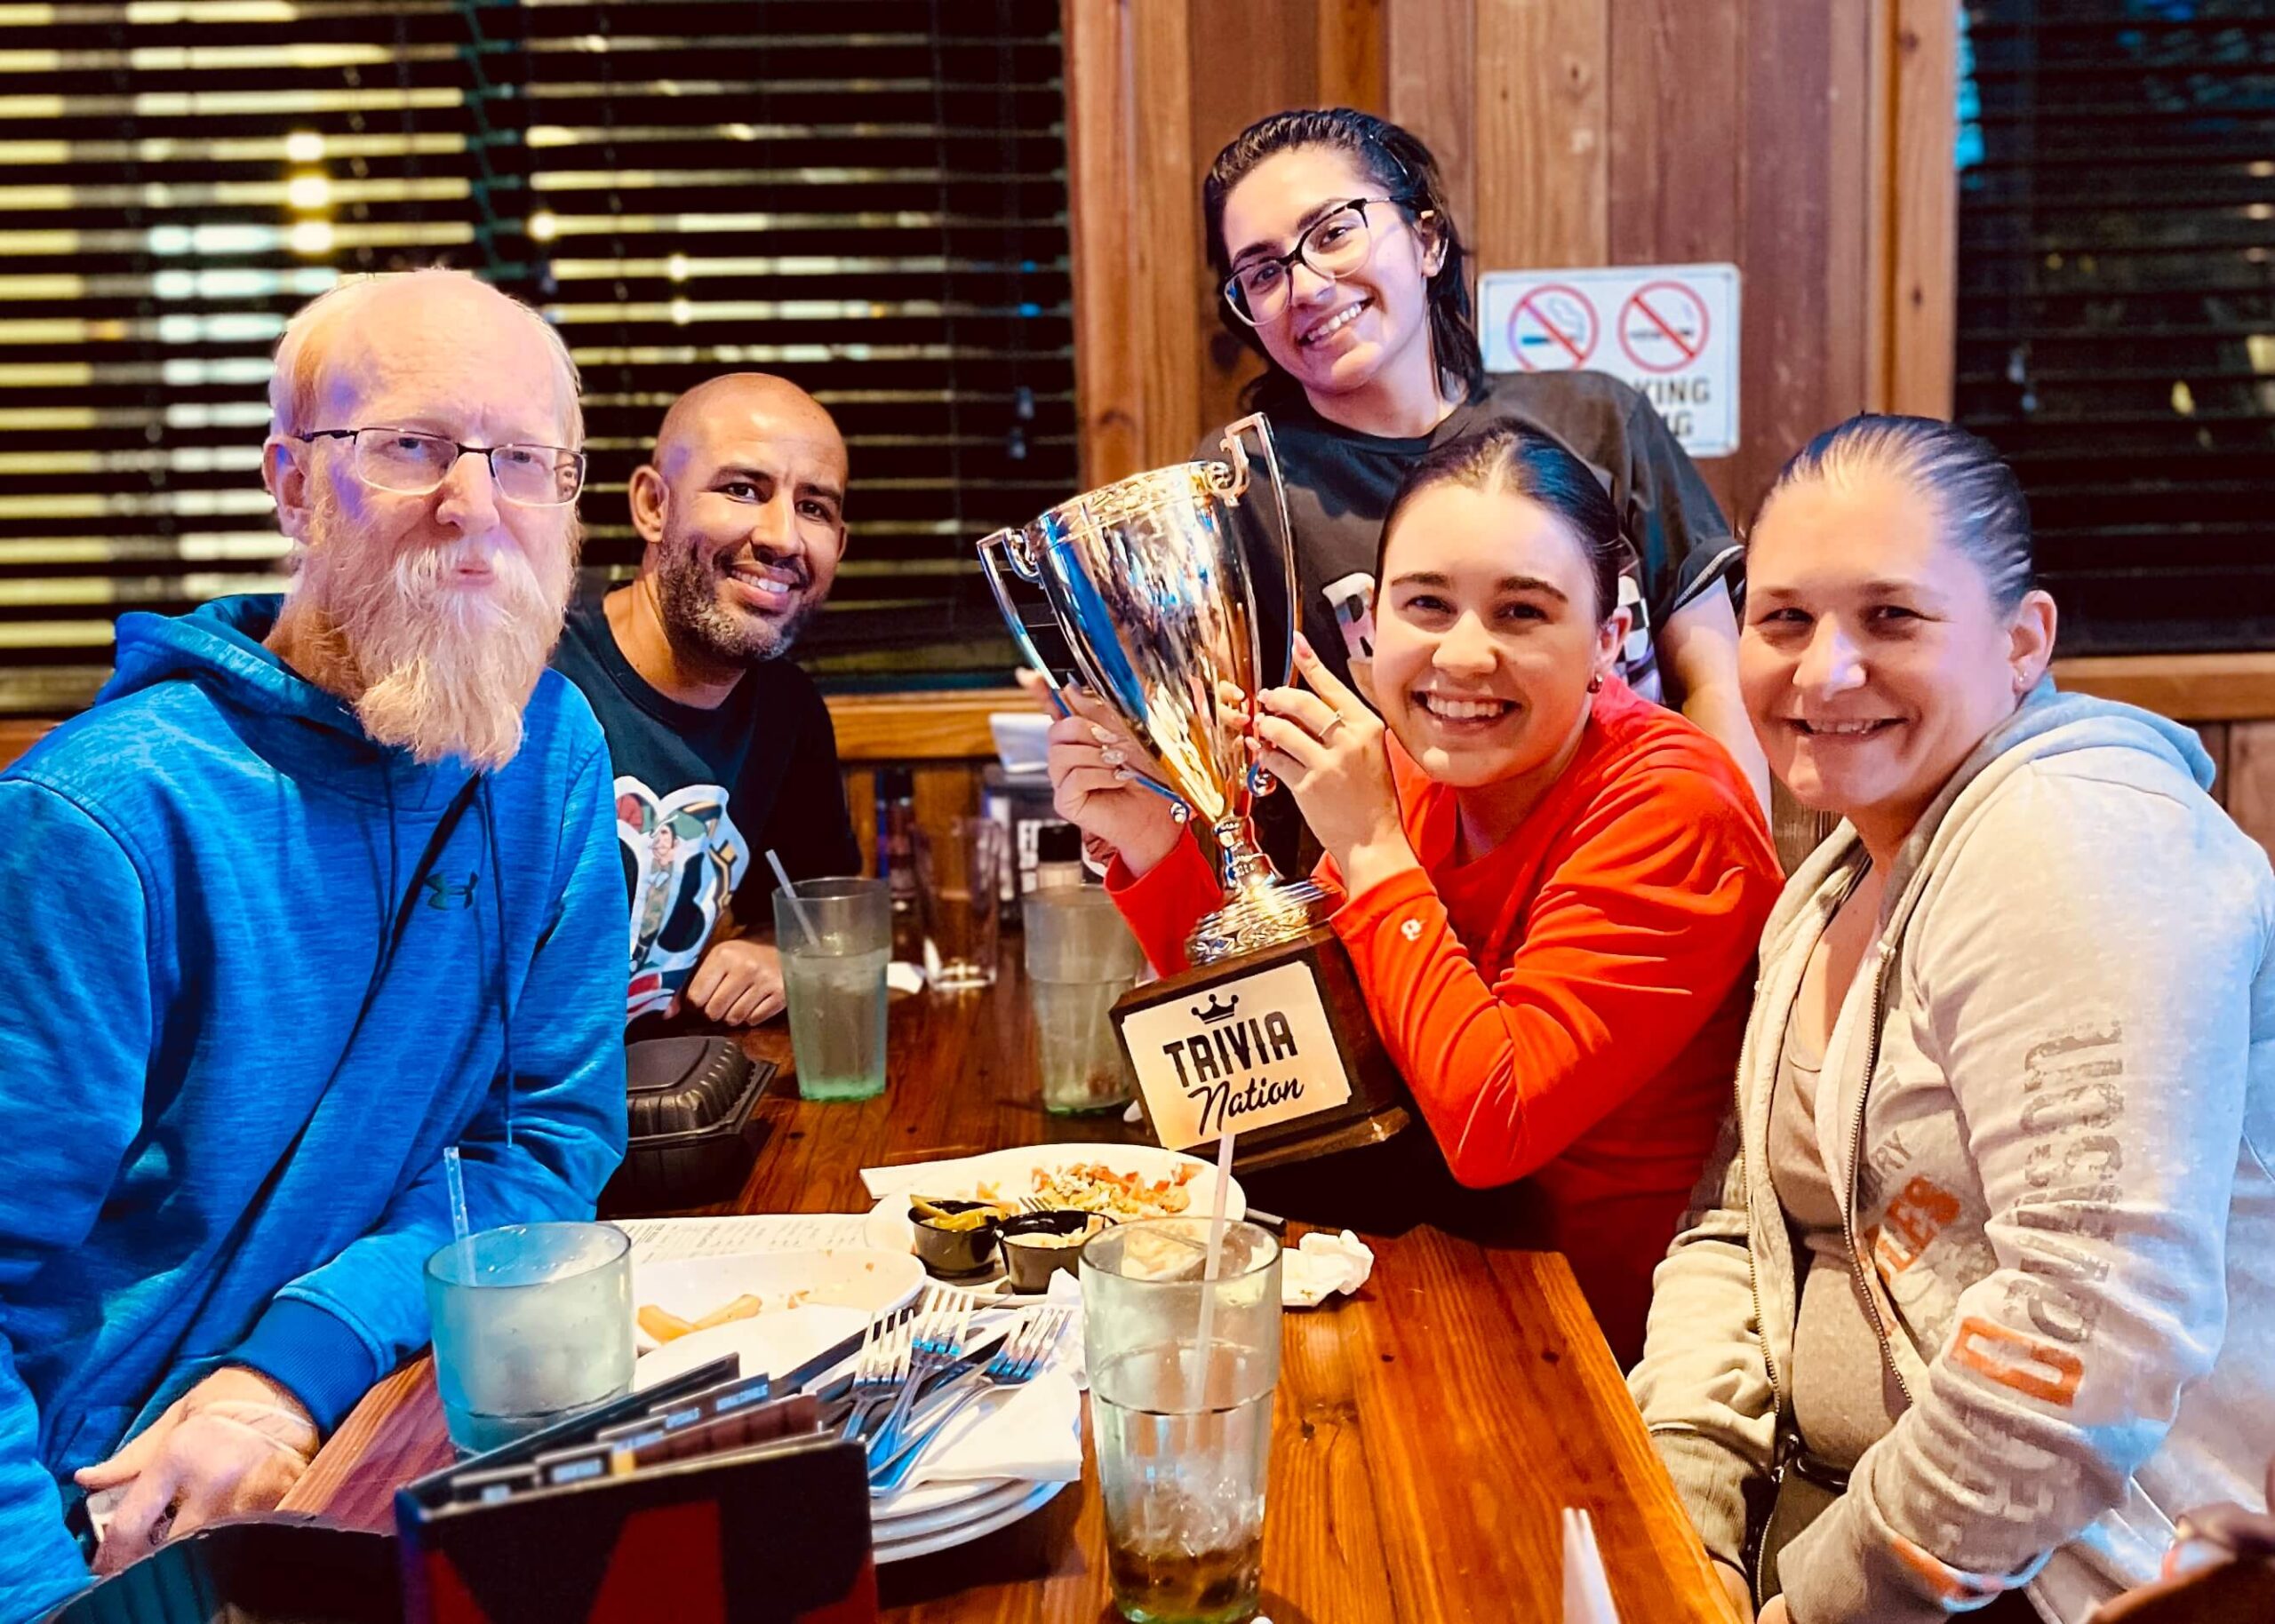 Miller's Ale House Miami FL 33176 trivia night: group of five men and women sitting at a table smiling with empty plates of food on the table and a woman in an orange shirt holding a Trivia Nation trophy